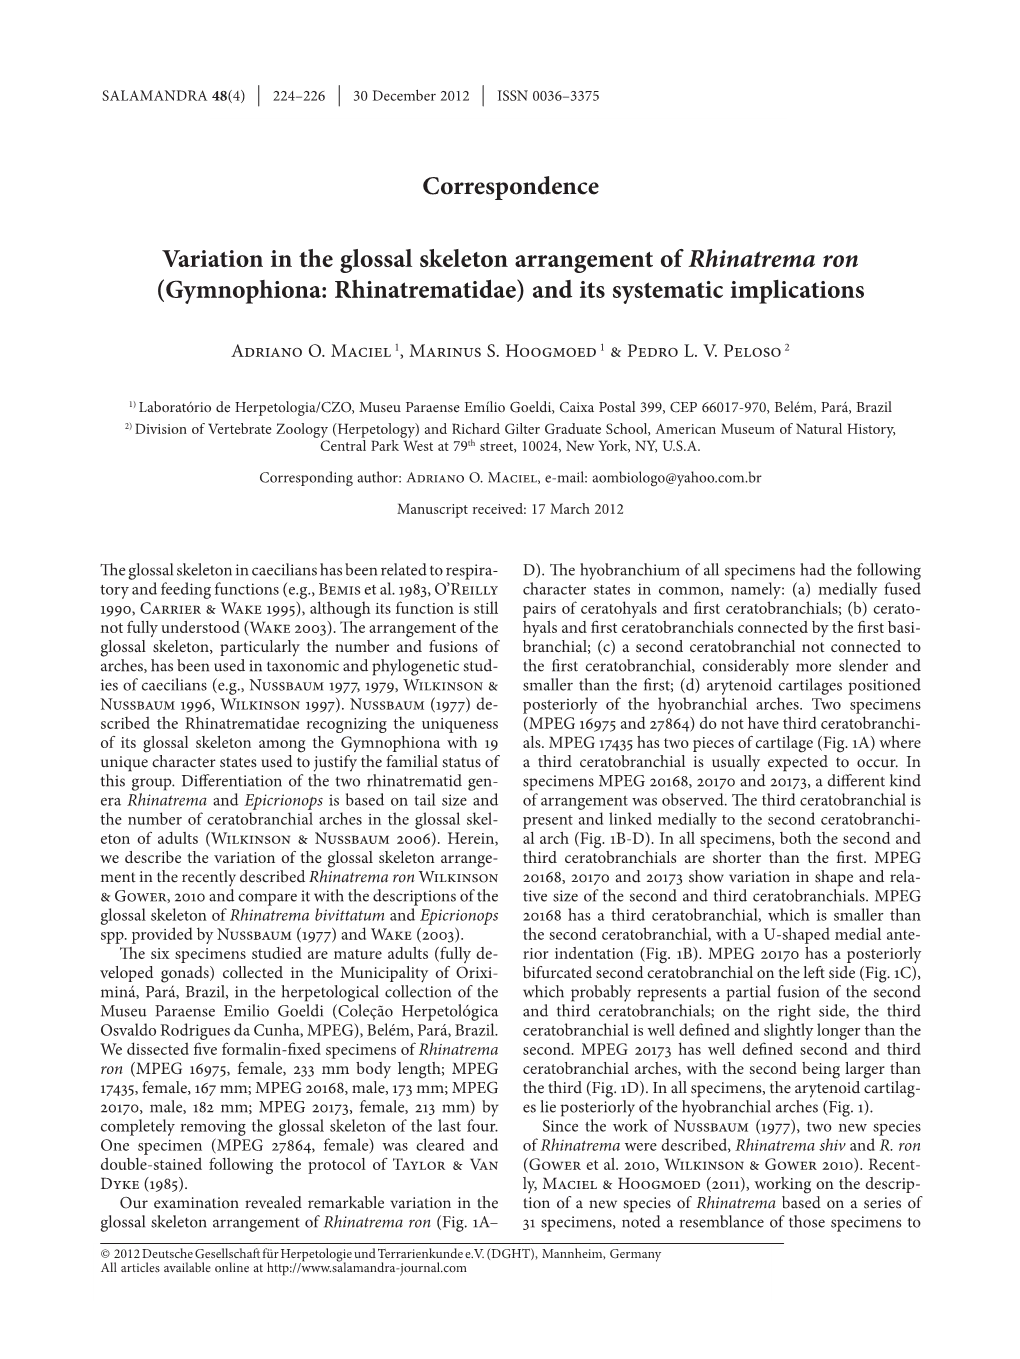 Gymnophiona: Rhinatrematidae) and Its Systematic Implications